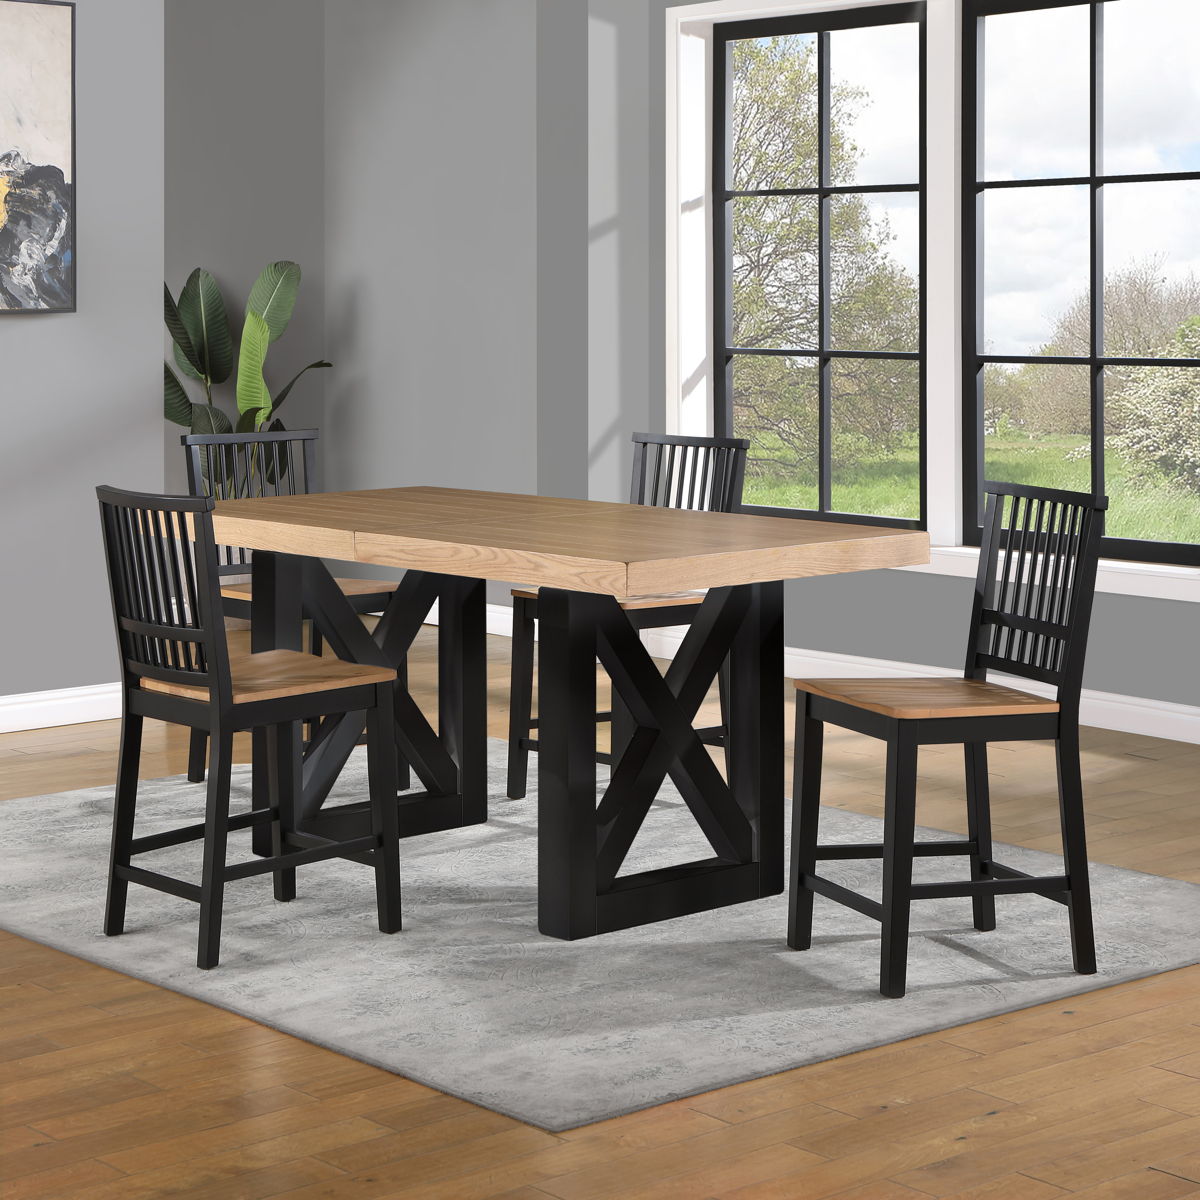 Magnolia - 5 Piece Counter Table Dining Set - Black / Light Brown